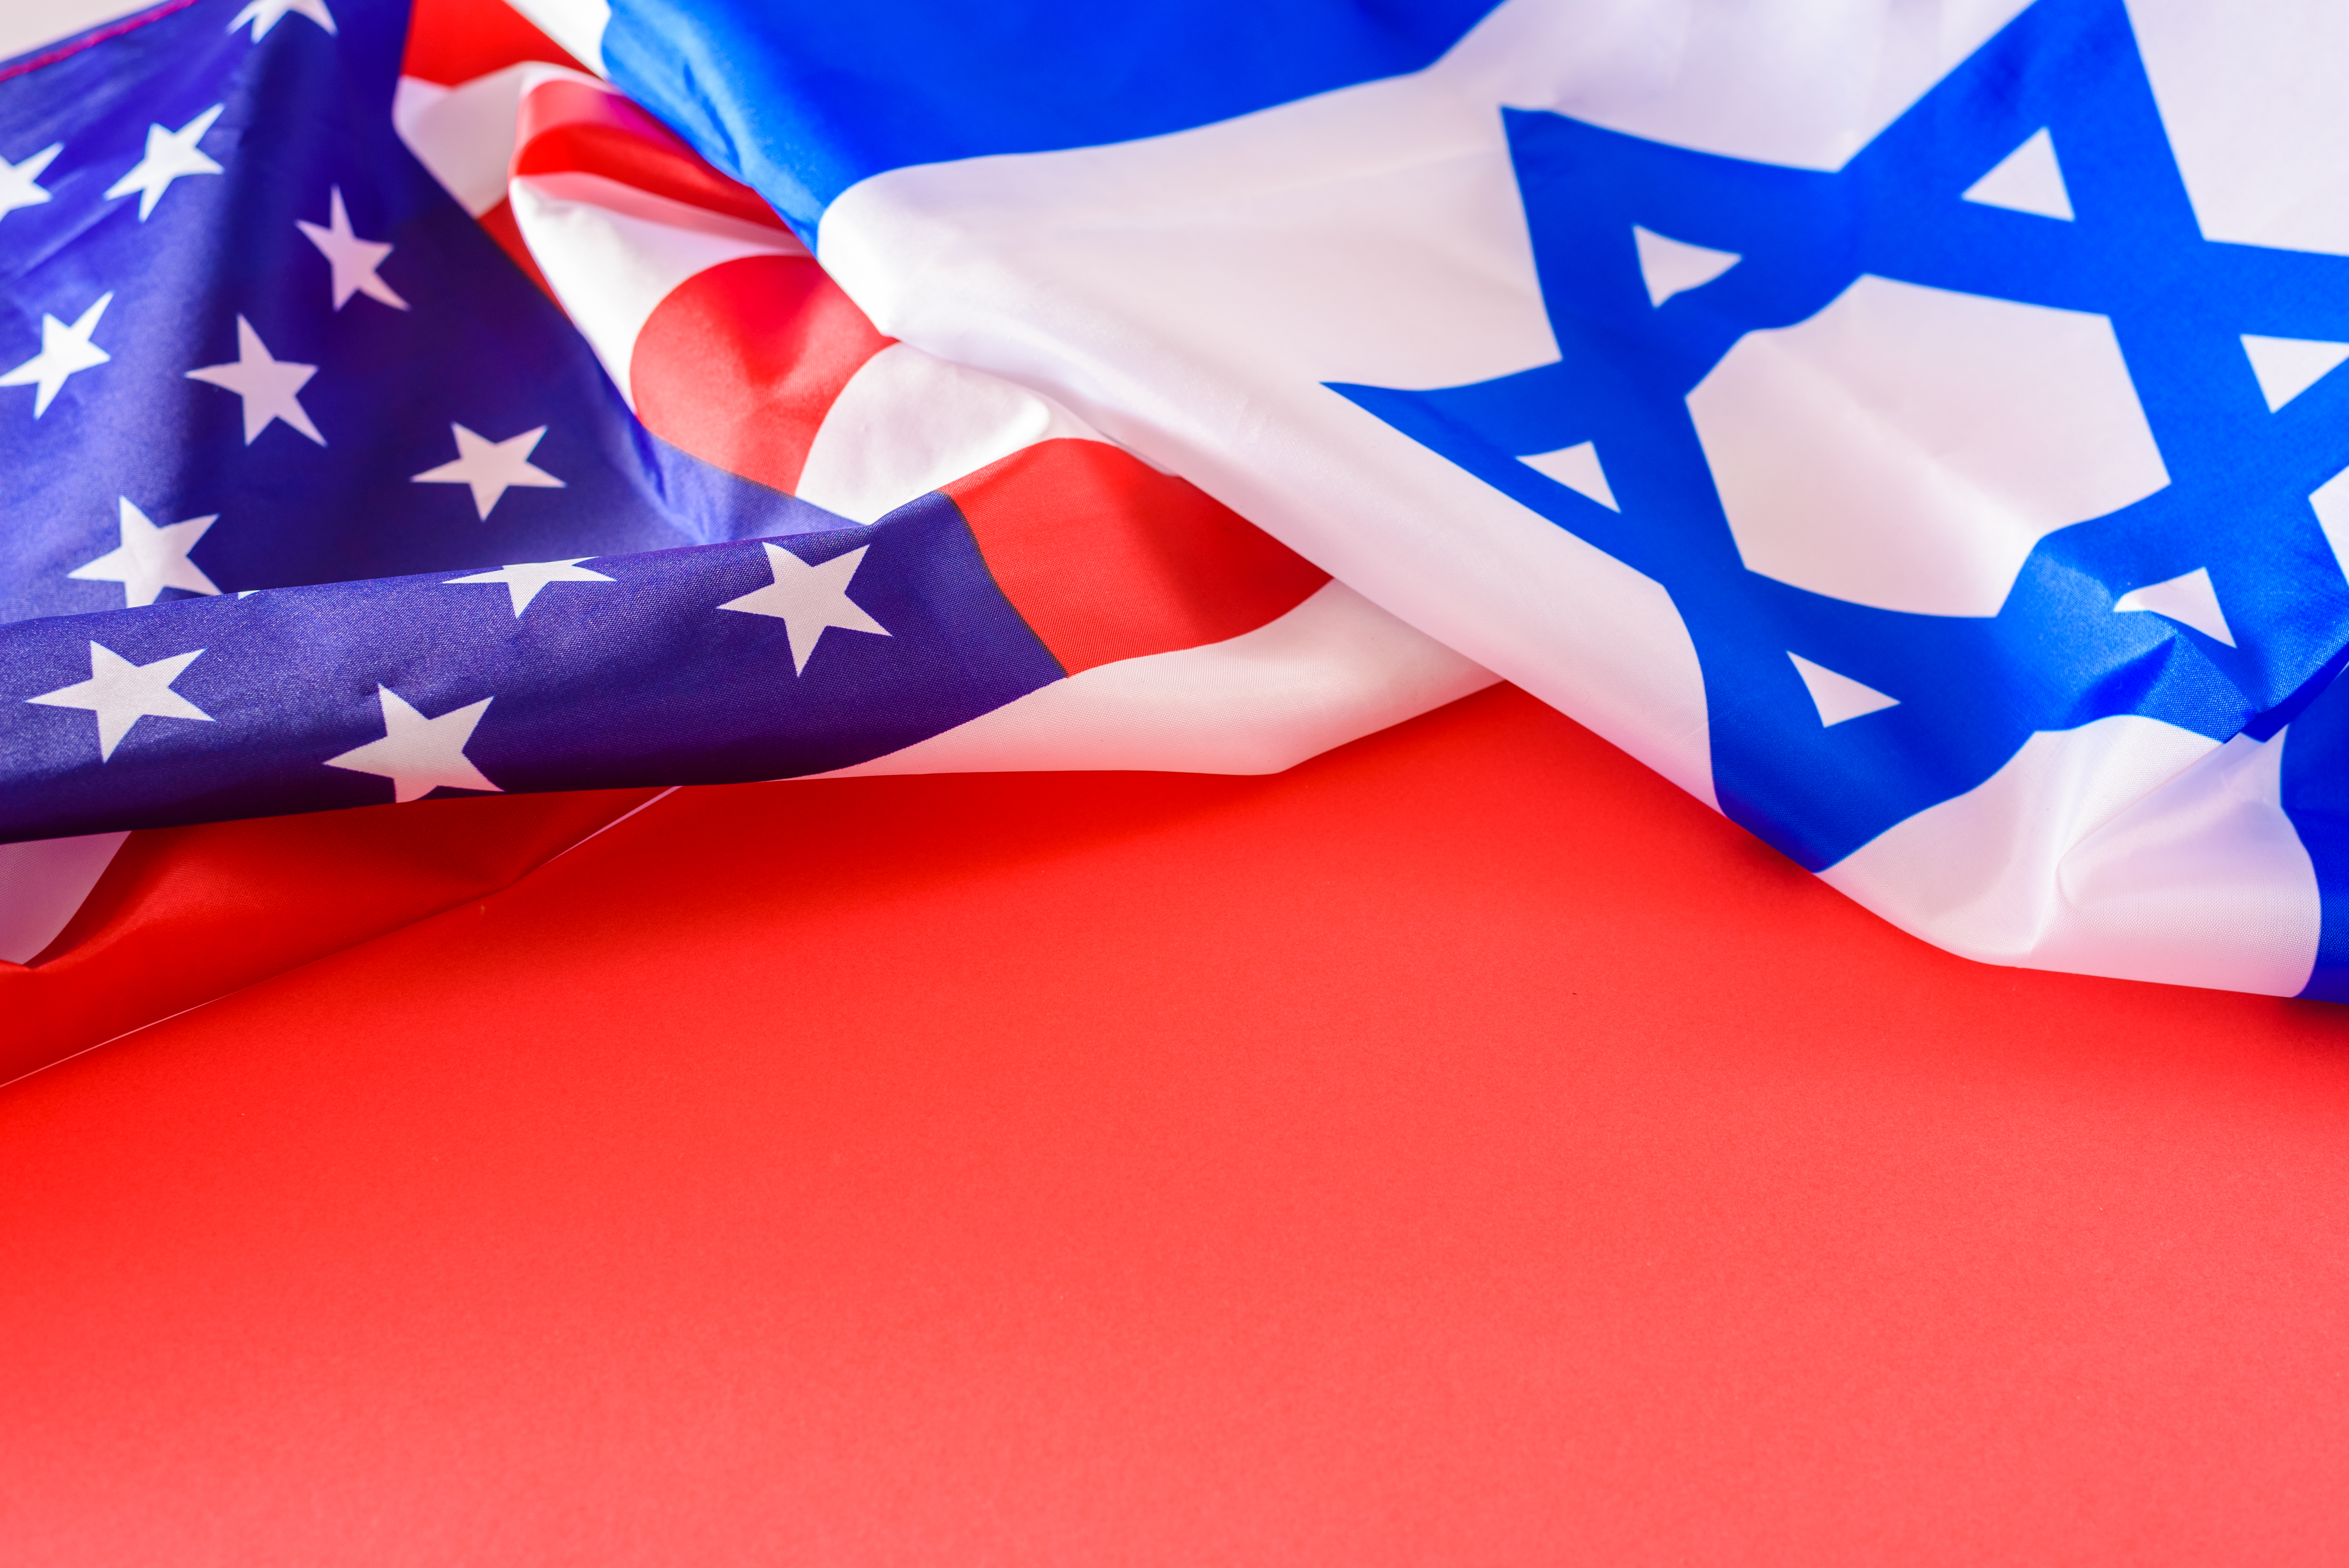 A flag of the United States and Israel, allied countries, with copy space in red.